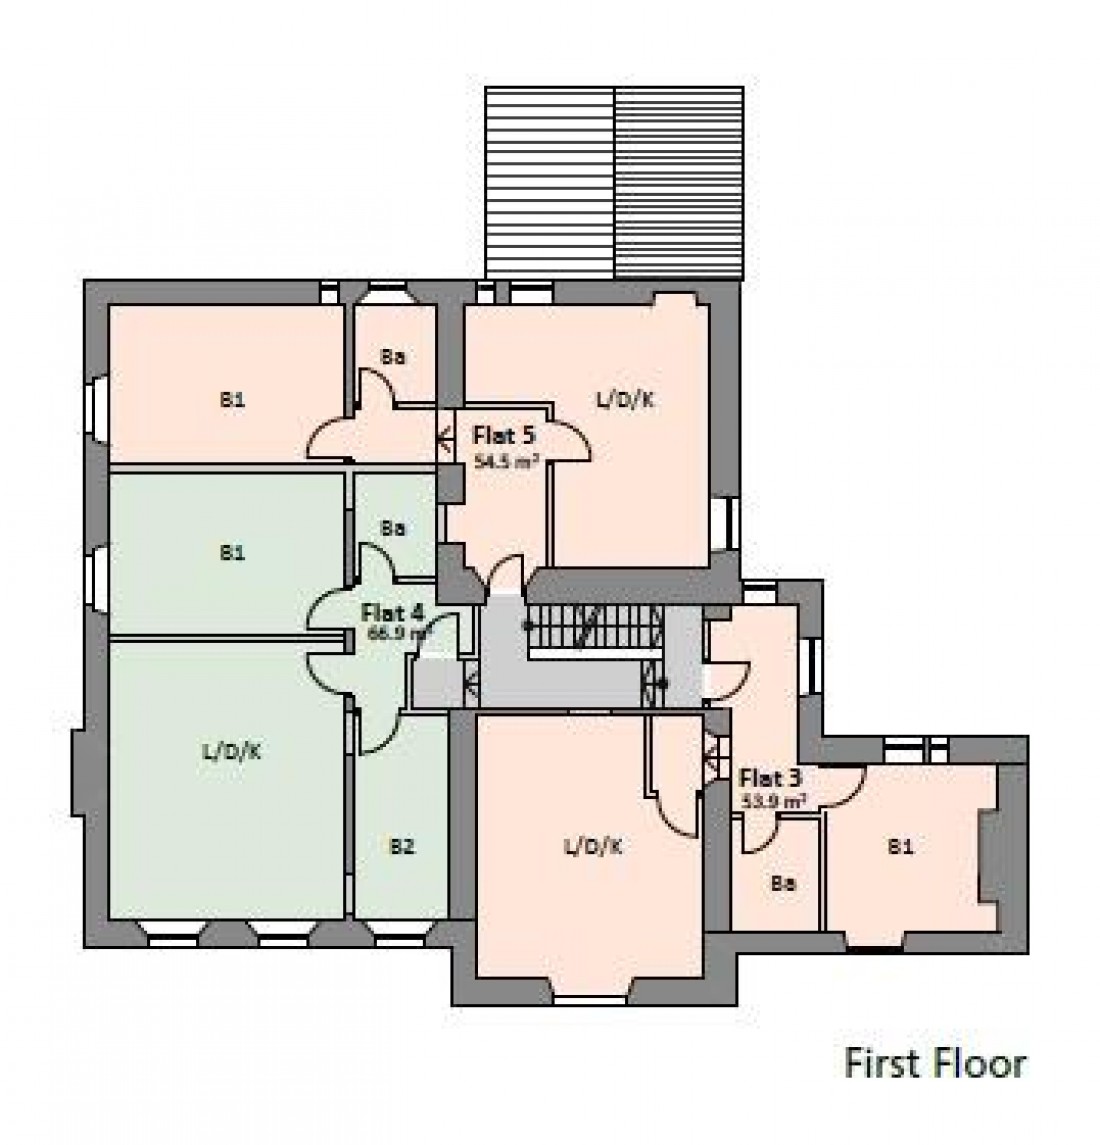 Floorplan for CONYGRE HOUSE - PLANNING GRANTED - FLAT CONVERSION